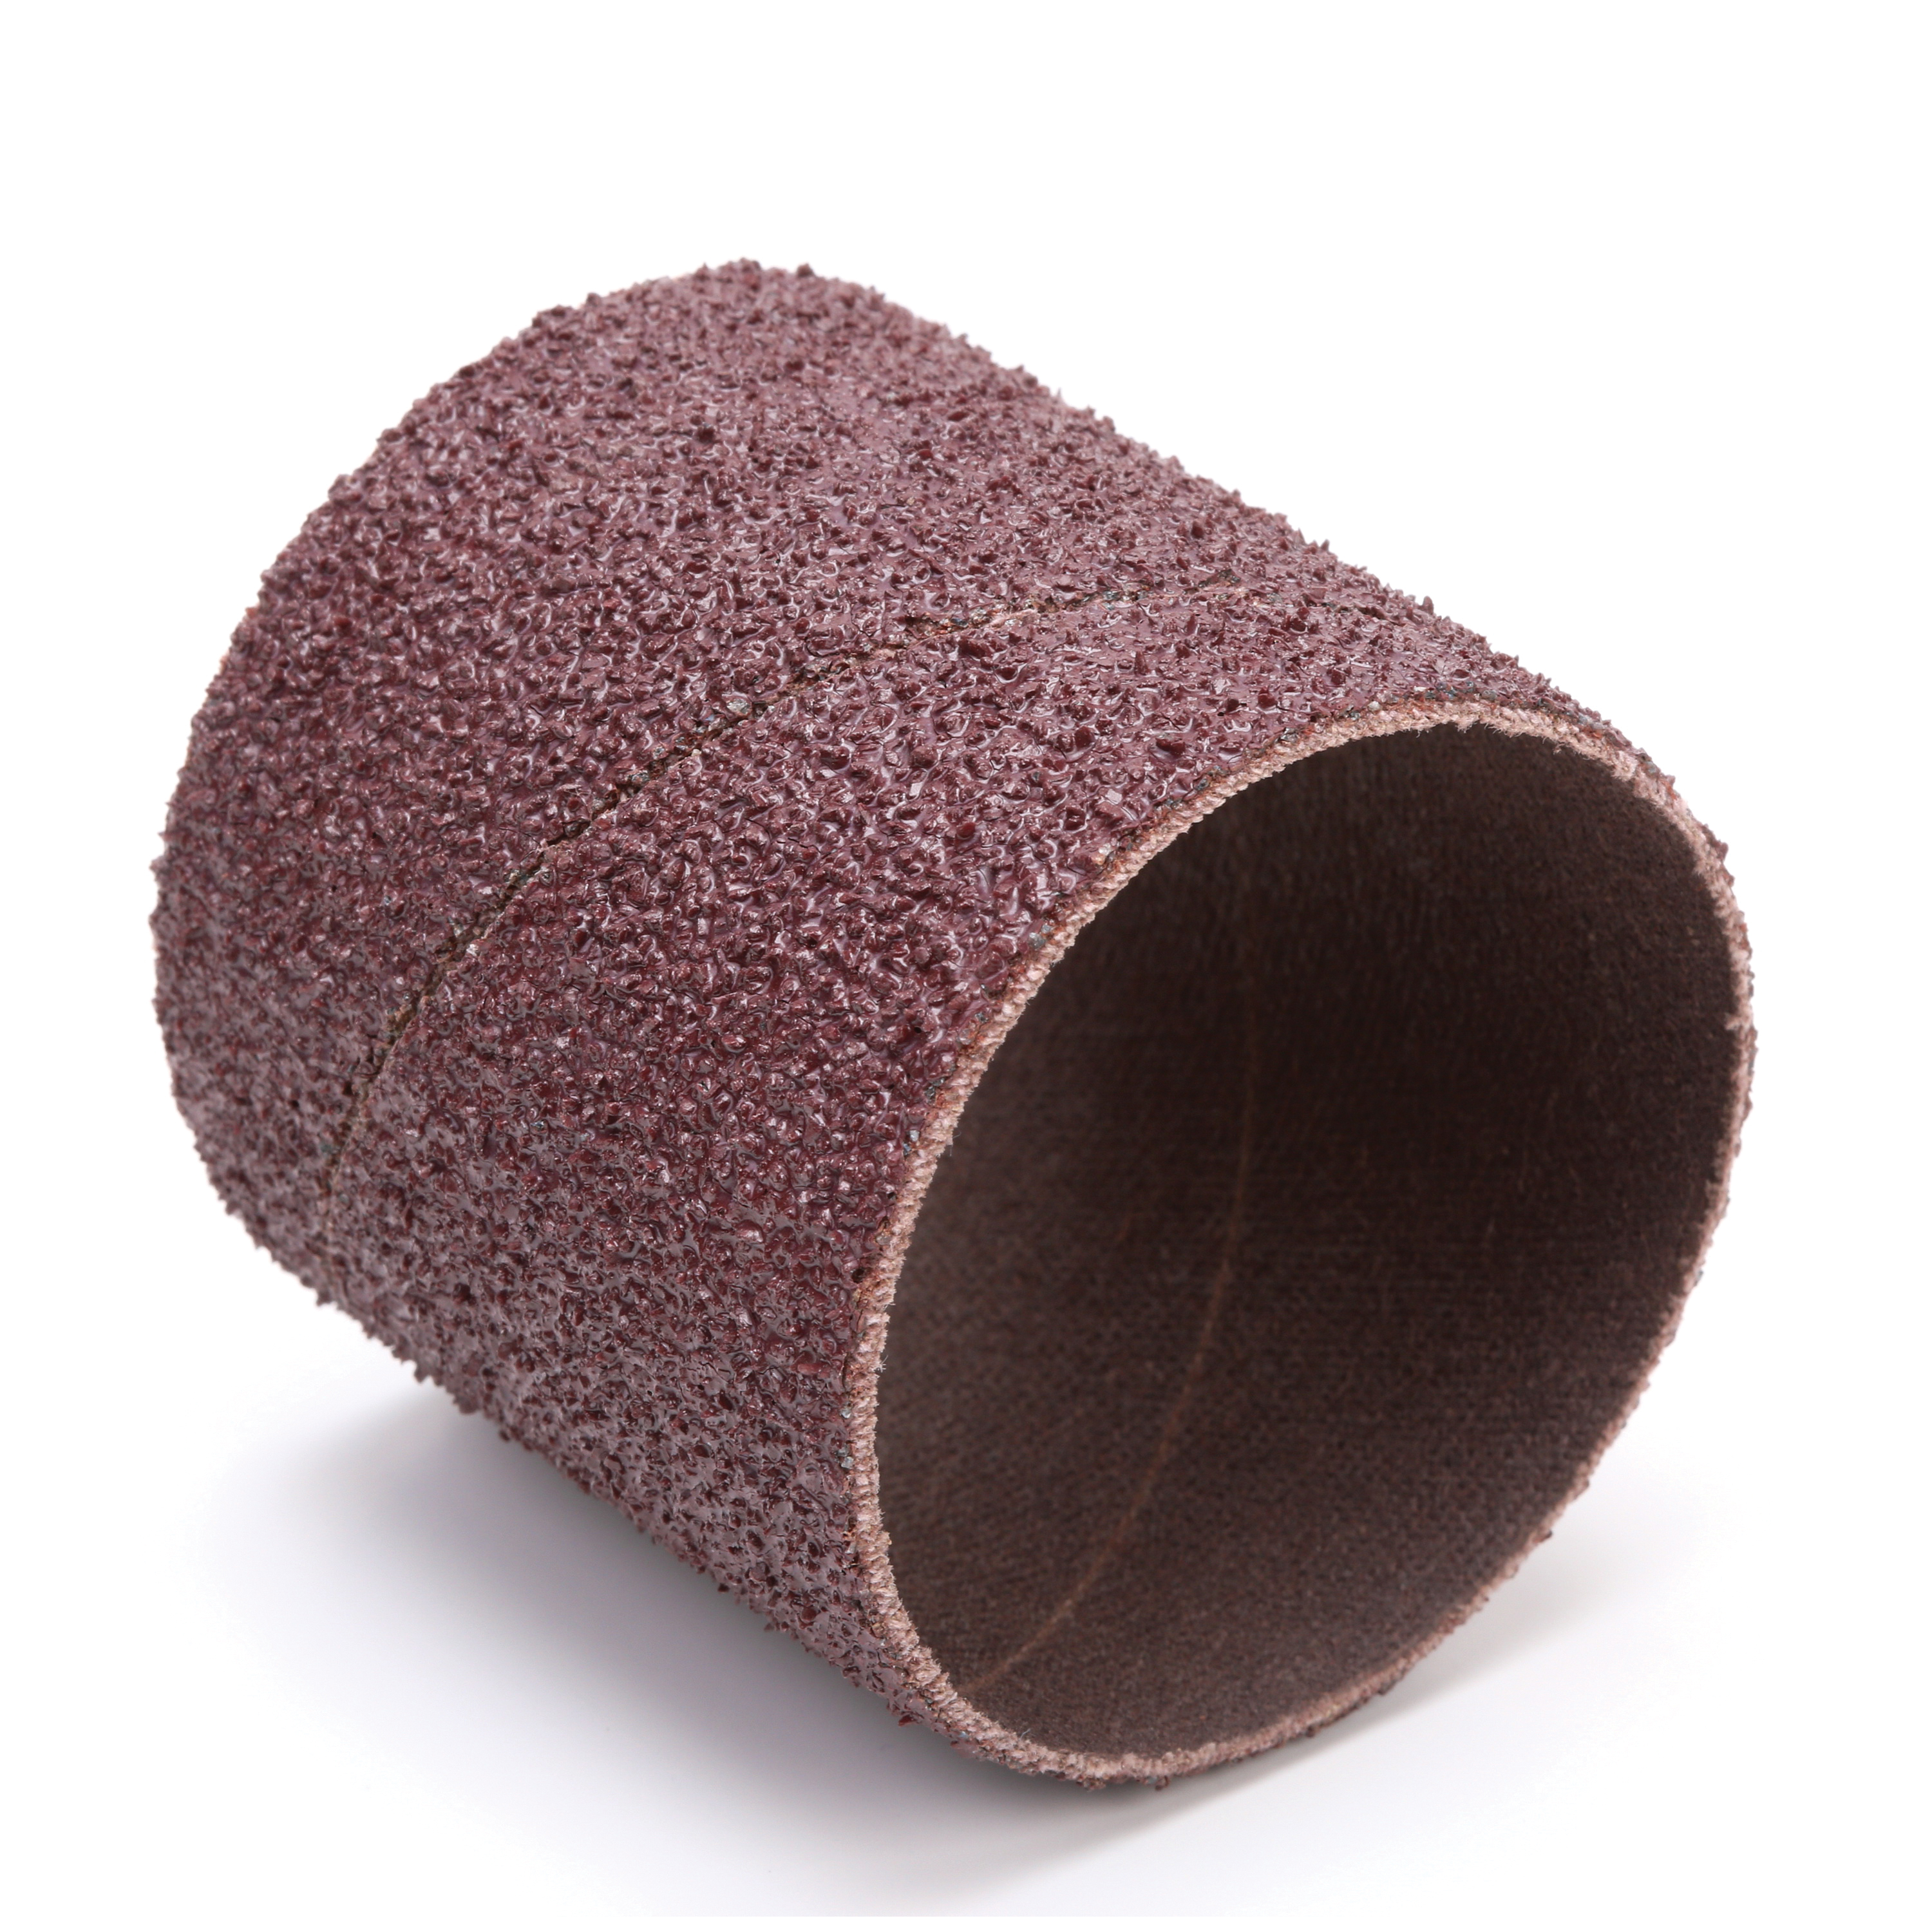 3M™ Evenrun™ 051144-40187 341D Coated Spiral Band, 2 in Dia x 2 in L Band, 36 Grit, Very Coarse Grade, Aluminum Oxide Abrasive